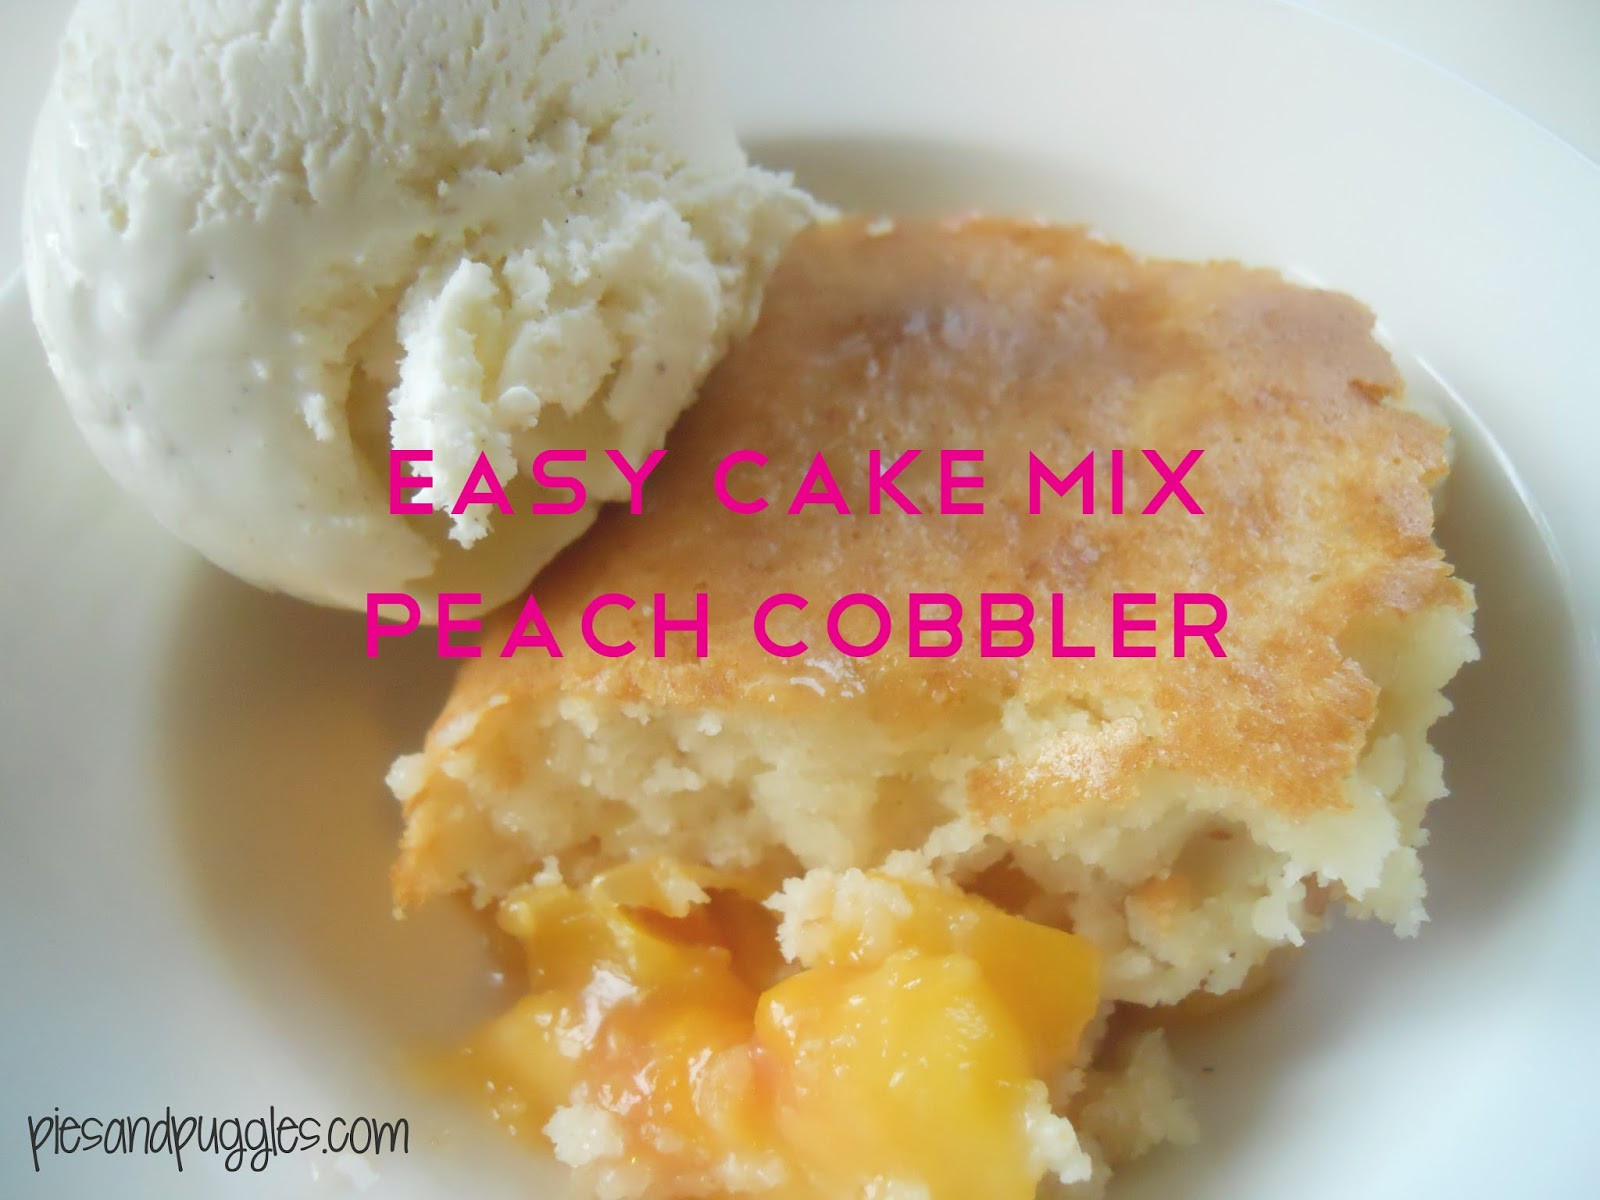 Cake Mix Peach Cobbler
 Pies and Puggles Easy Cake Mix Peach Cobbler